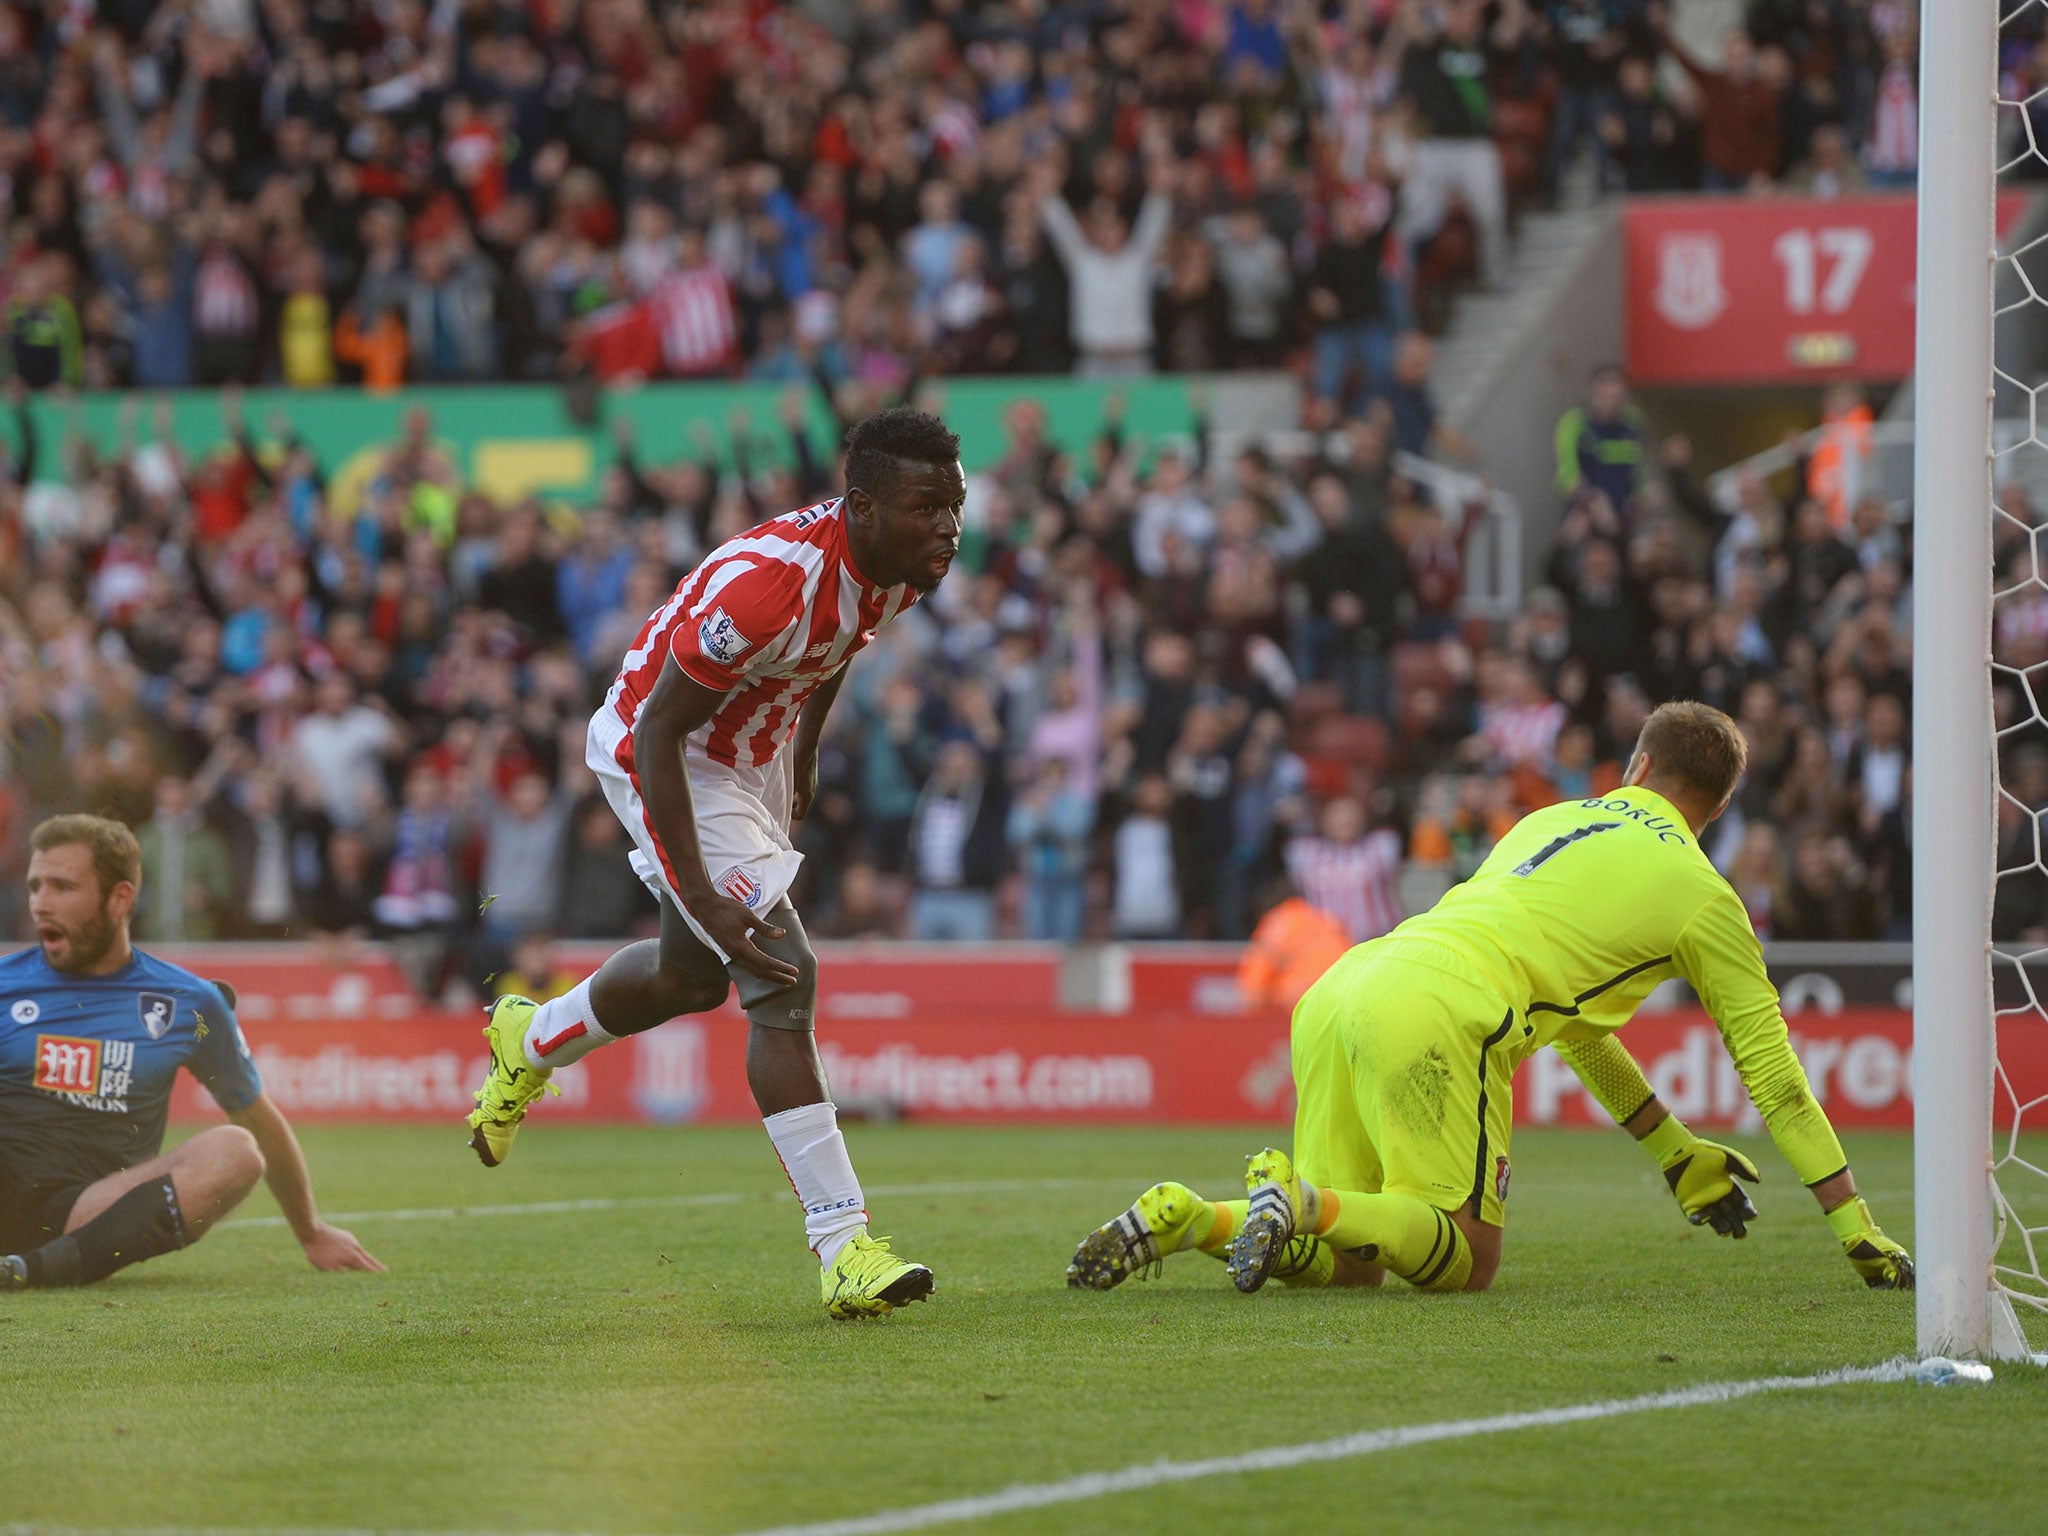 Mame Biram Diouf scores for Stoke against Bournemouth earlier in the season